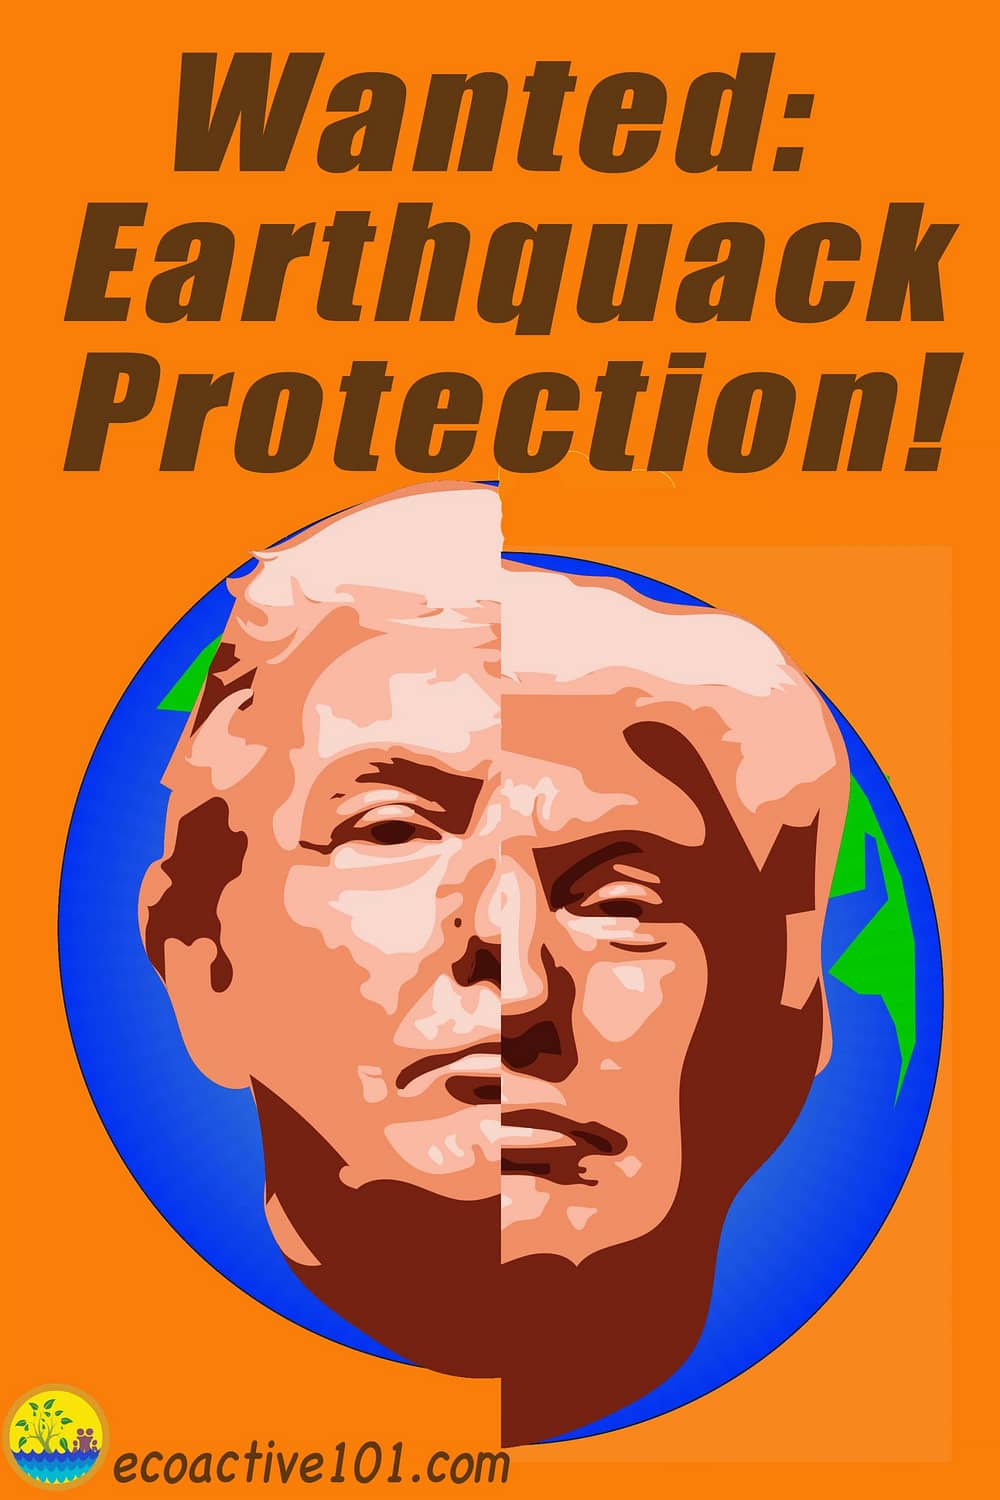 Trump's face superimposed over an earth split down the middle, as by a fault, with the words "Wanted: Earthquack Protection."